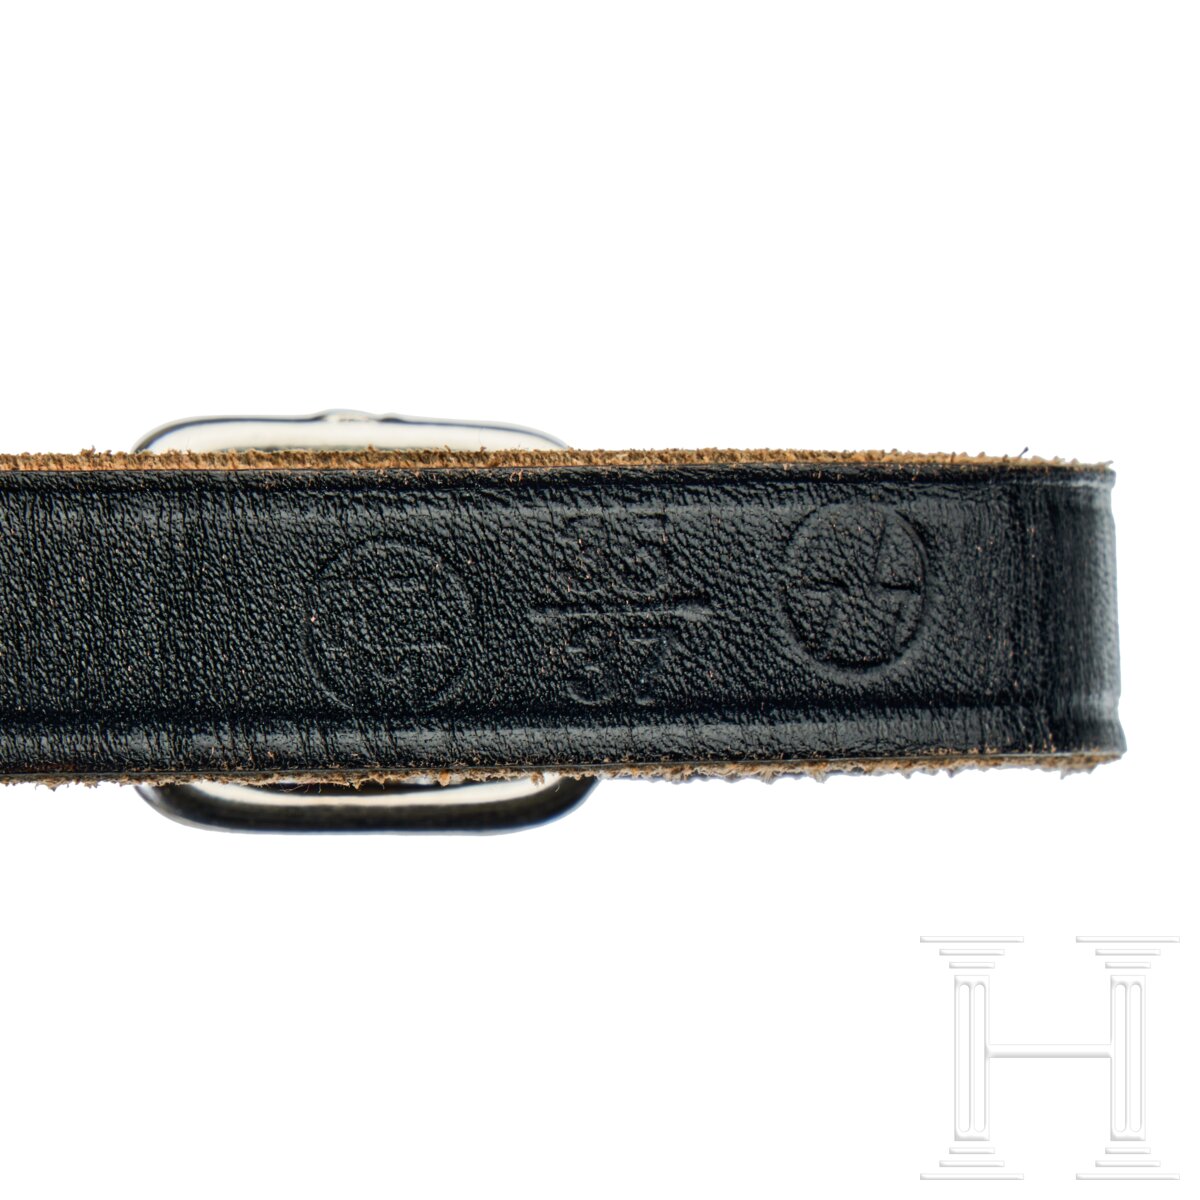 A Cross Strap for SS - Image 4 of 4